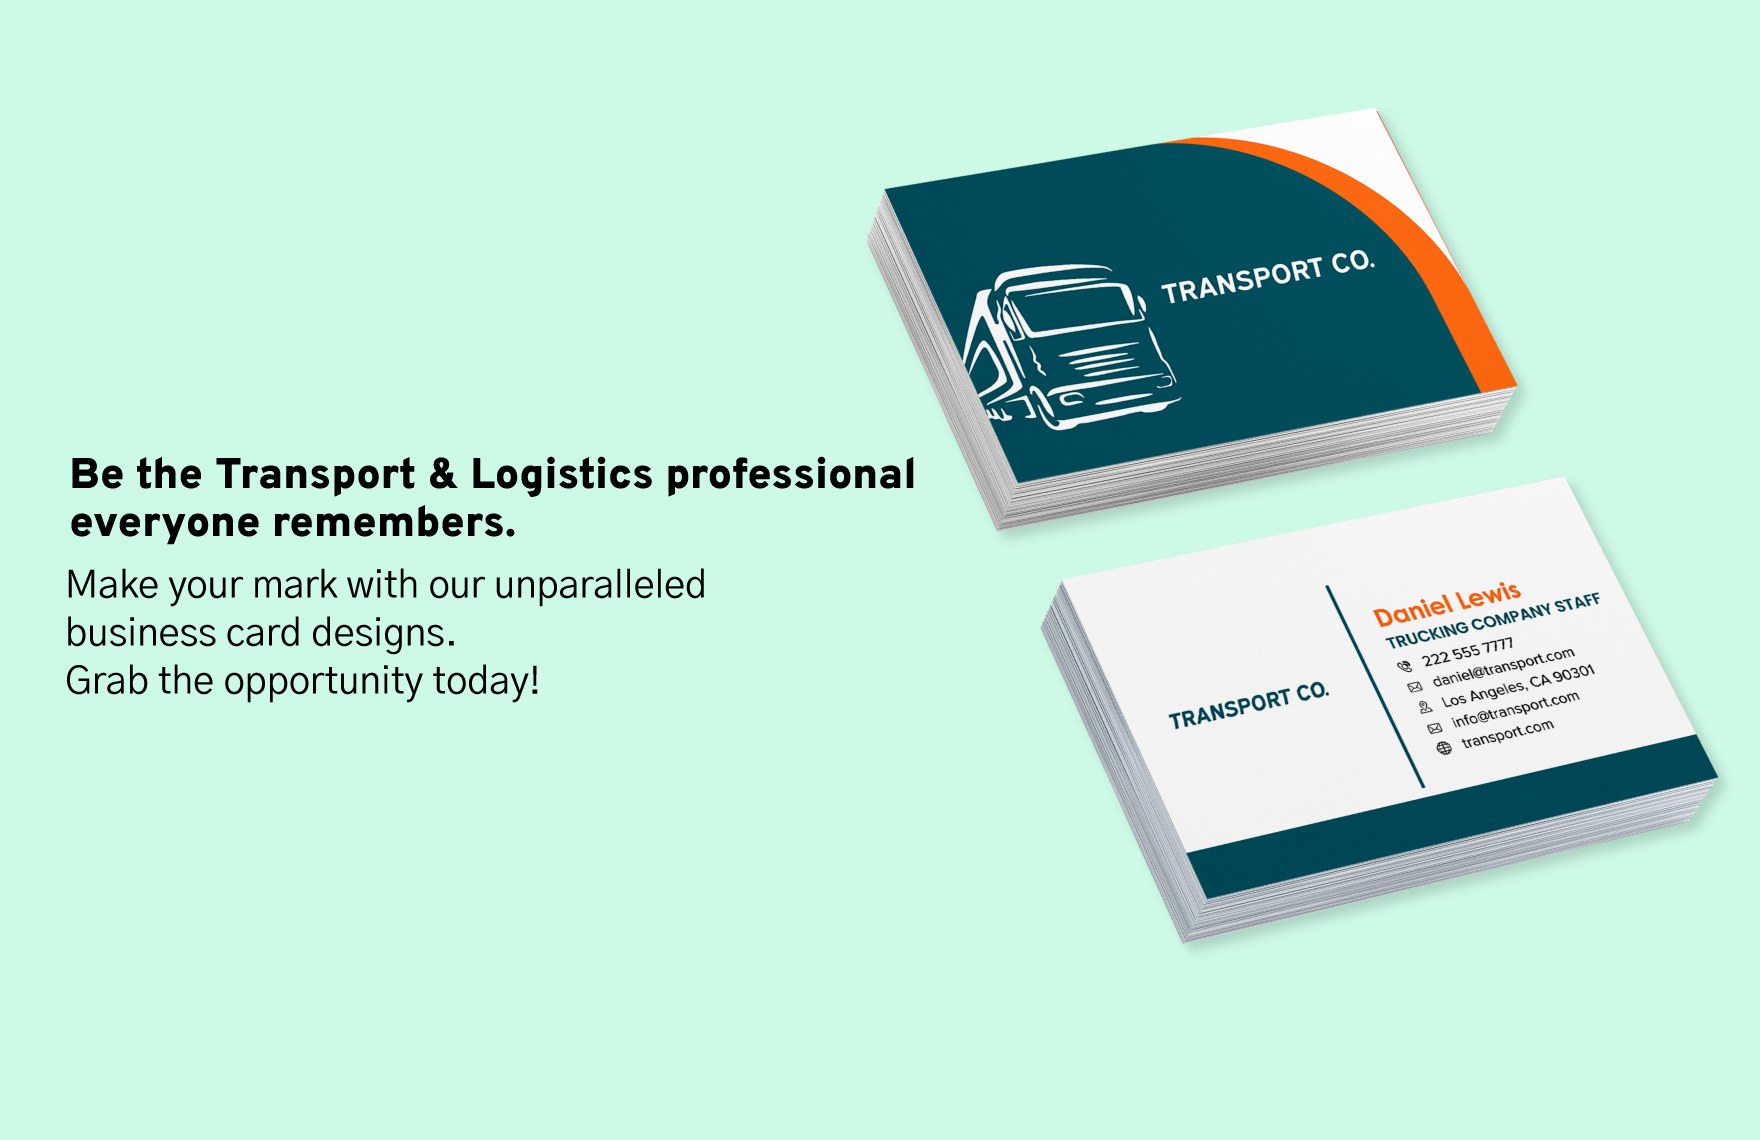 Transport and Logistics Trucking Company Business Card Template